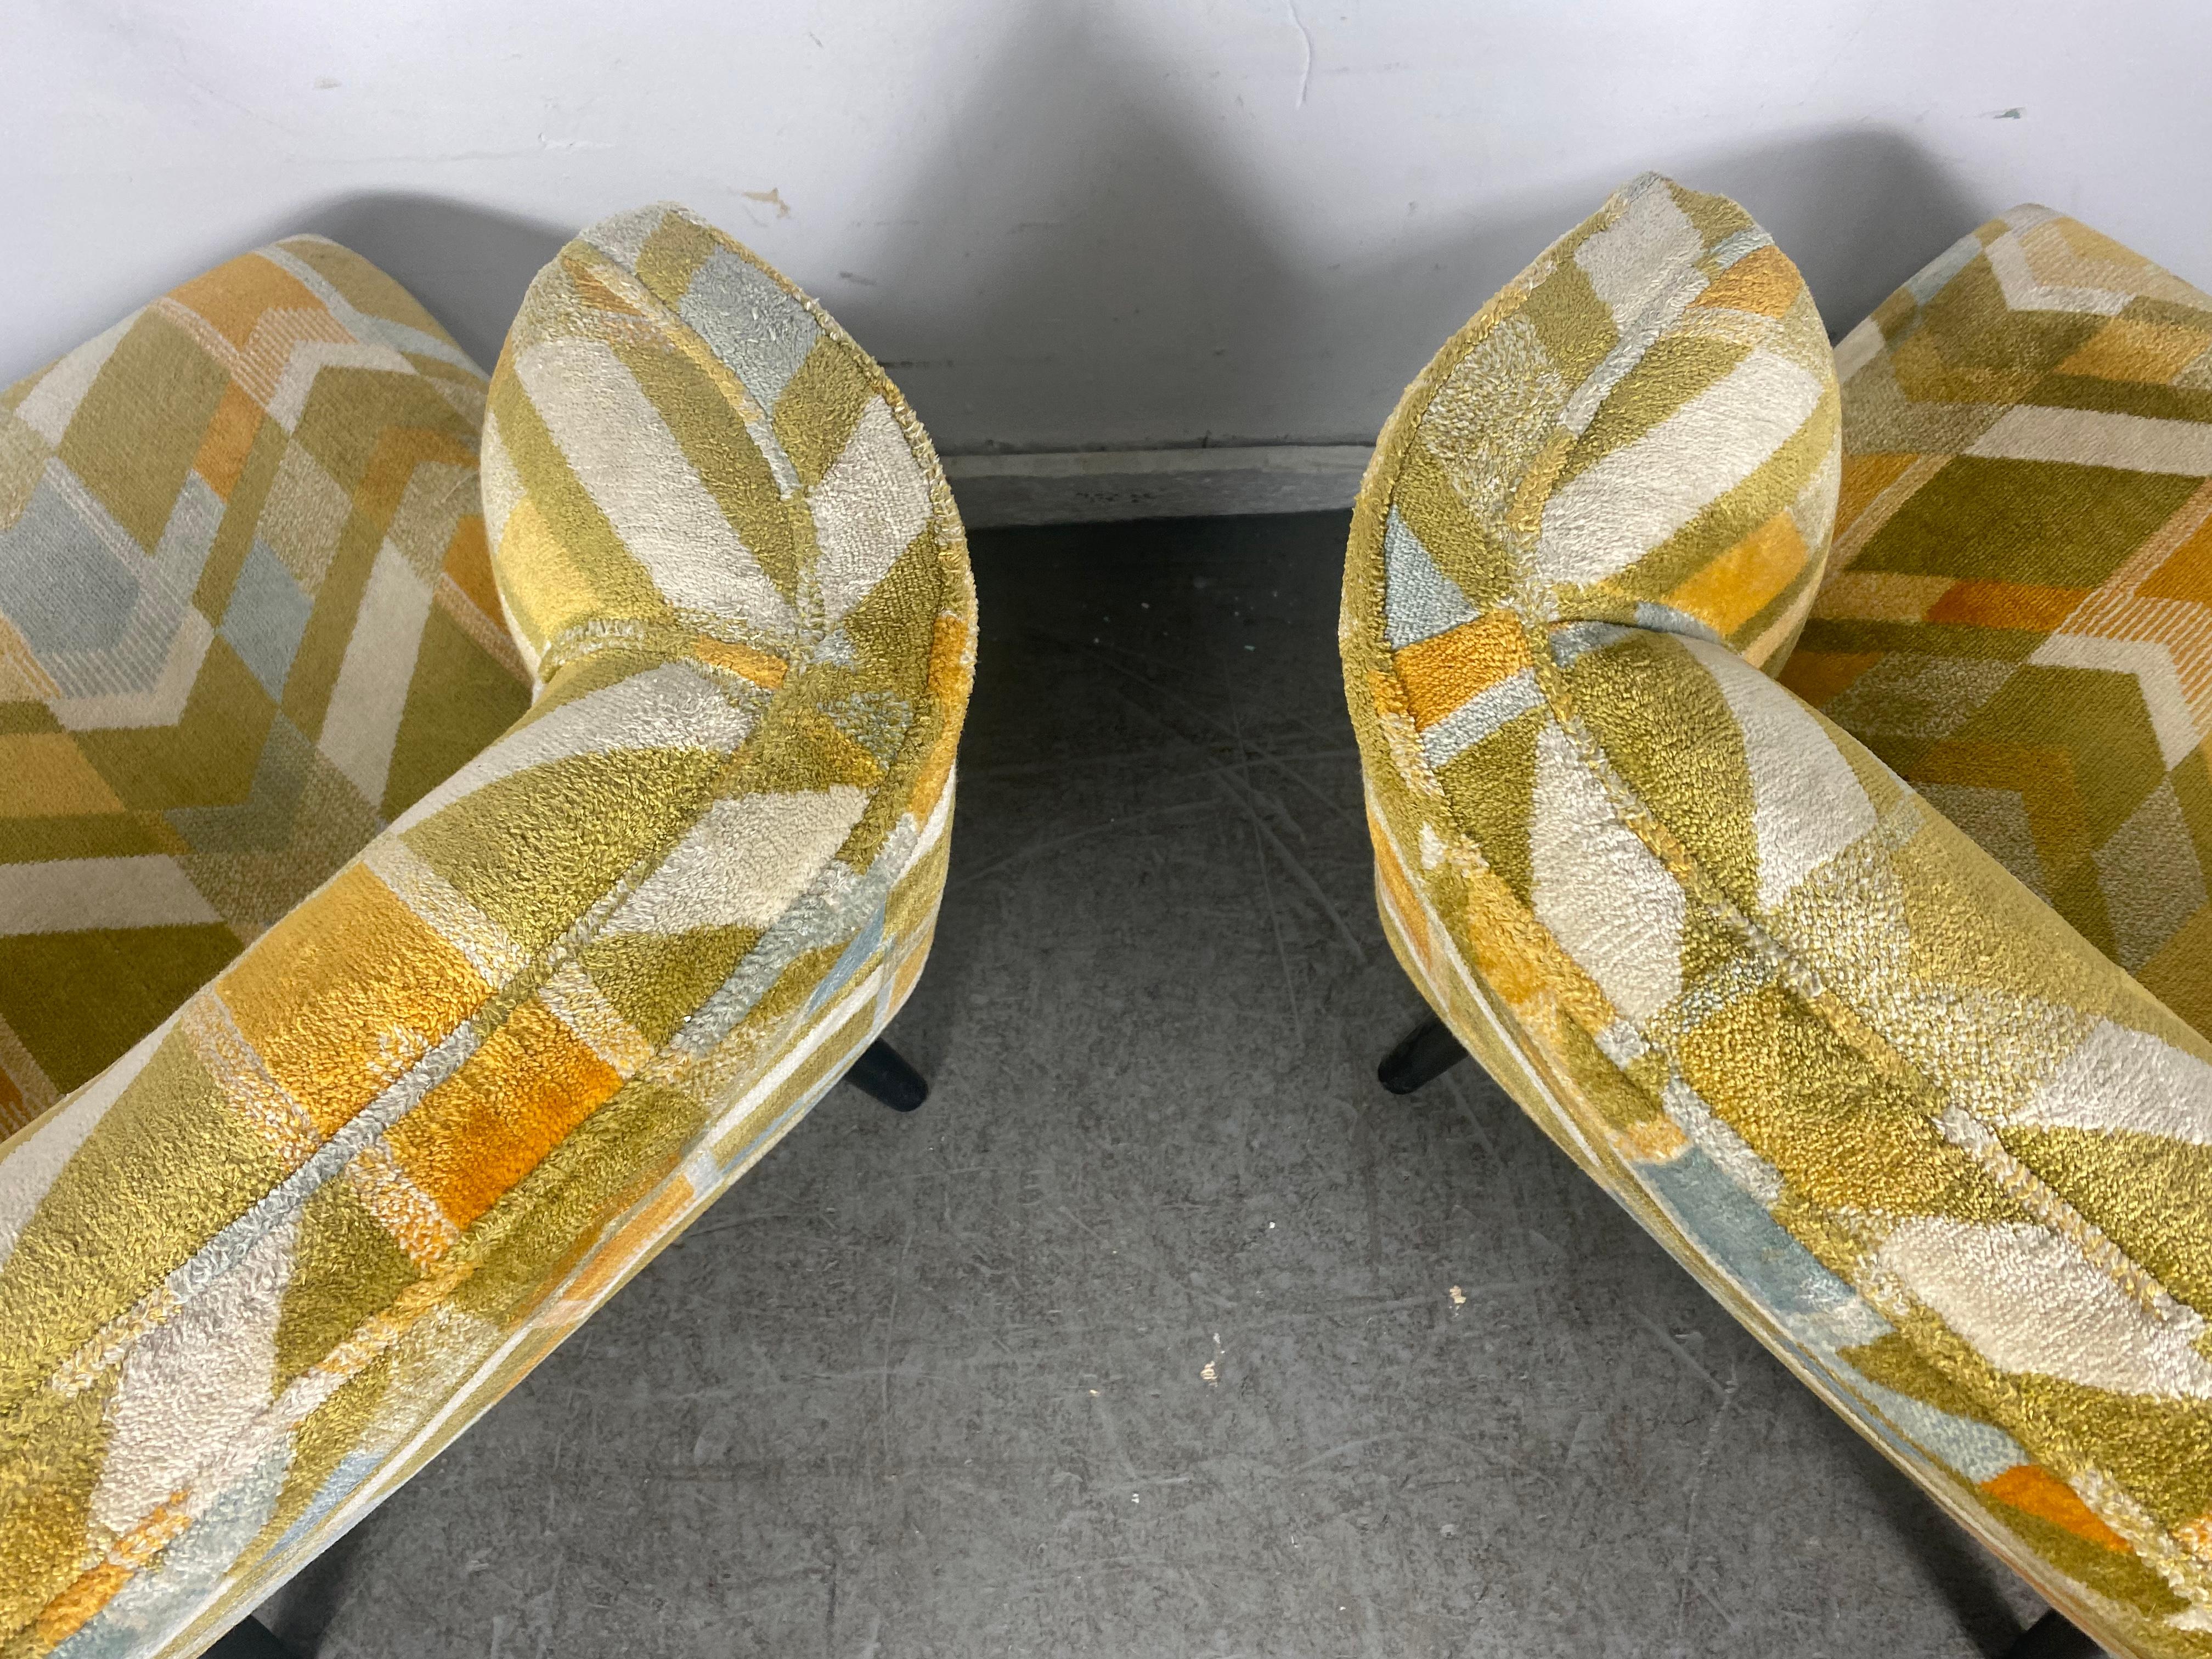 Nice pair slipper / lounge chairs, Classic California Modernist design, appear to have been reupholstered in the 1970s. Stylized geometric fabric, Extremely comfortable. Quality construction. Hand delivery avail to New York City or anywhere en route